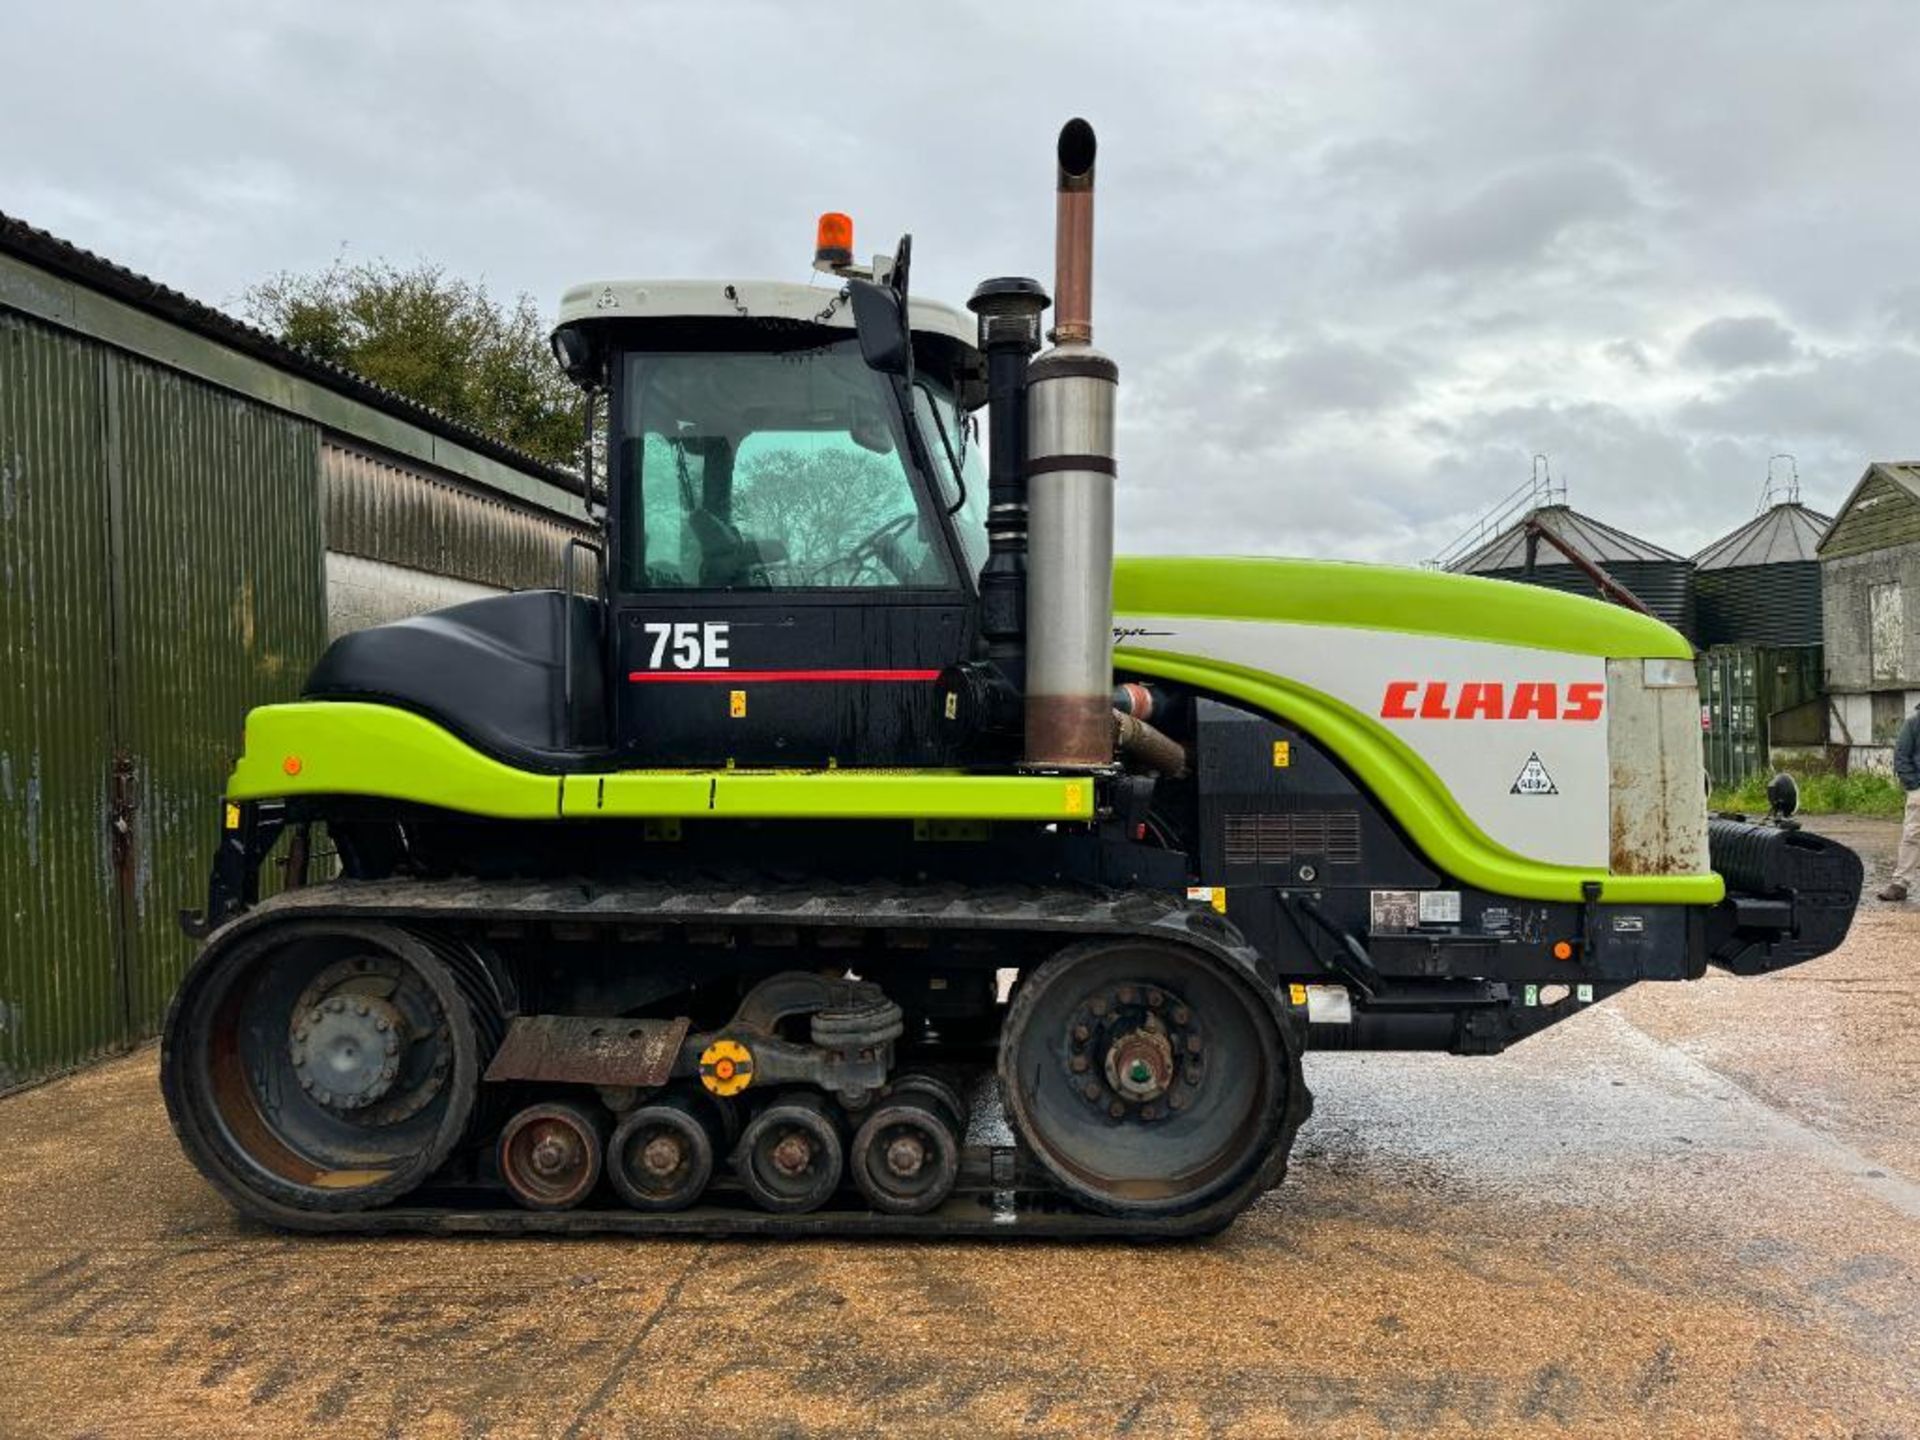 2001 Claas 75E Challenger rubber tracked crawler with 30" tracks, 20No 45kg front wafer weights, 4 m - Image 18 of 26